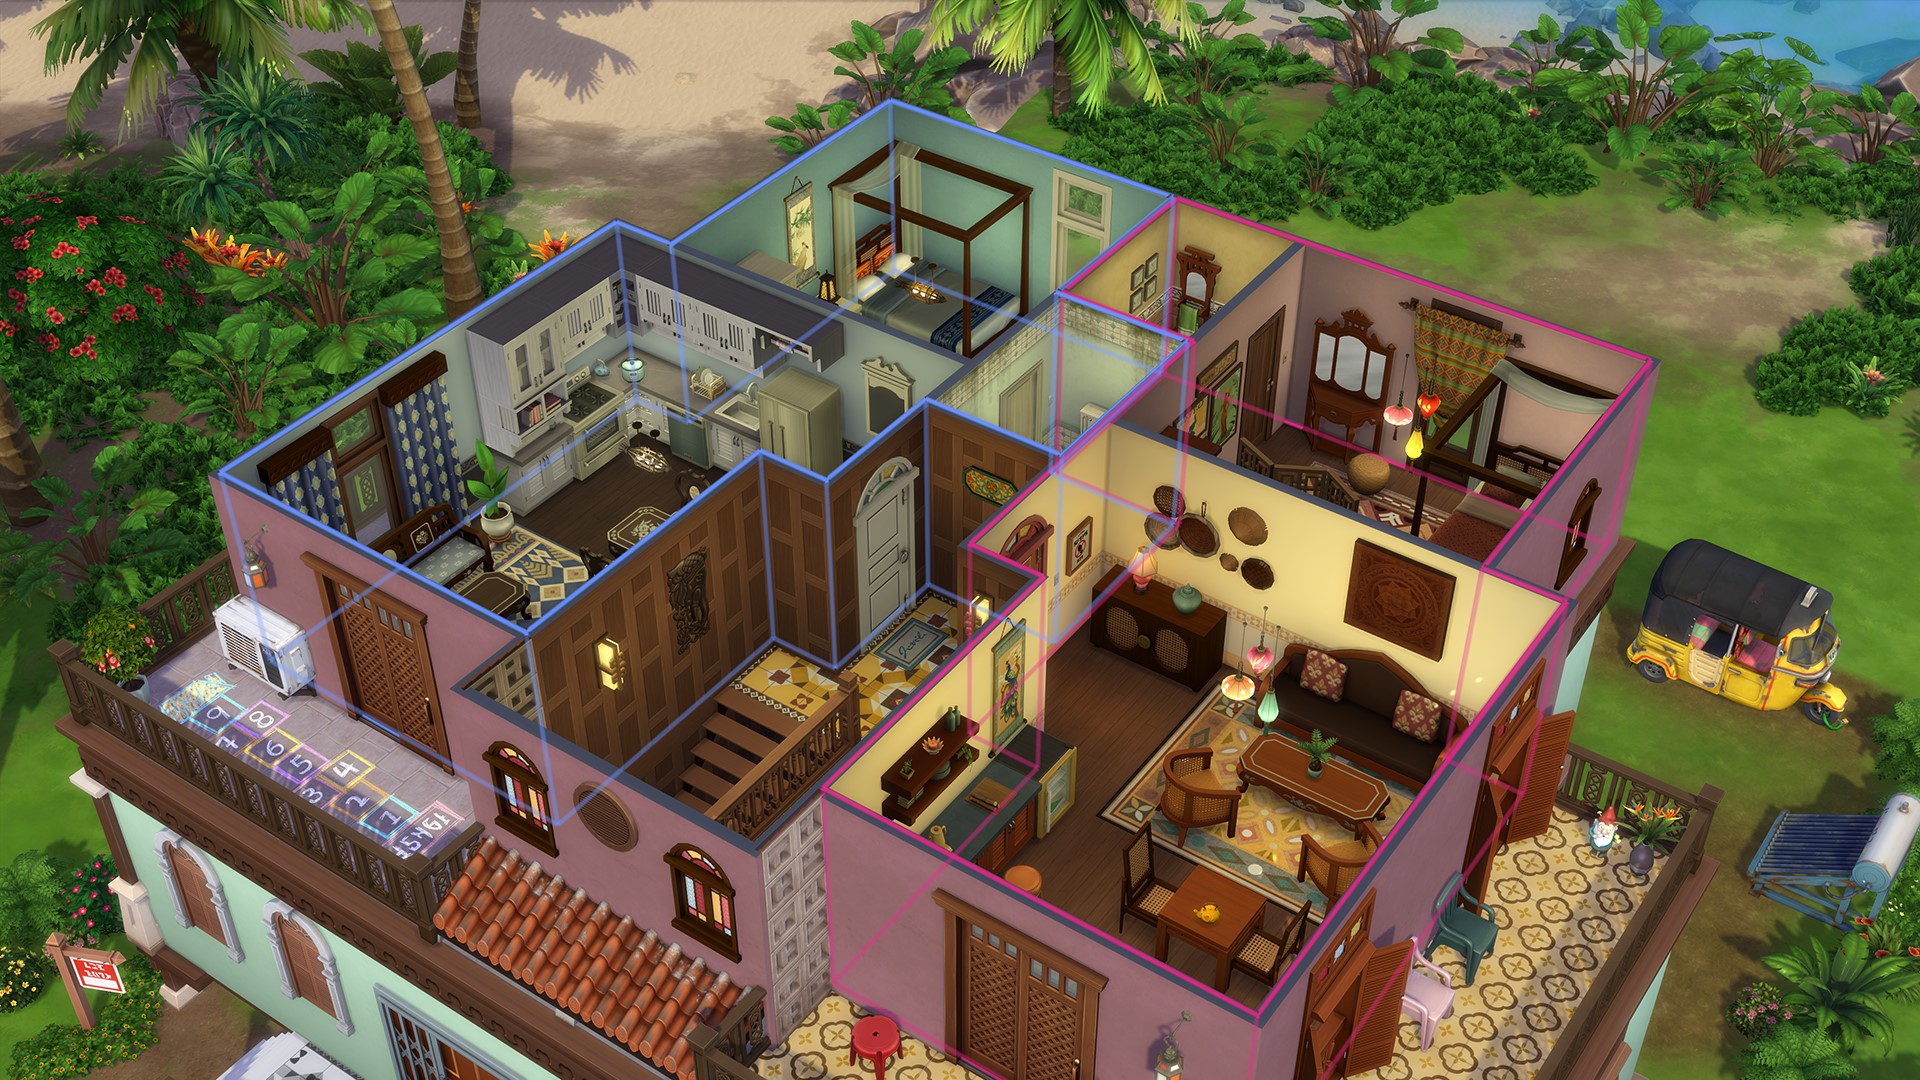 The Sims 4: For Rent expansion pits landlords against tenants